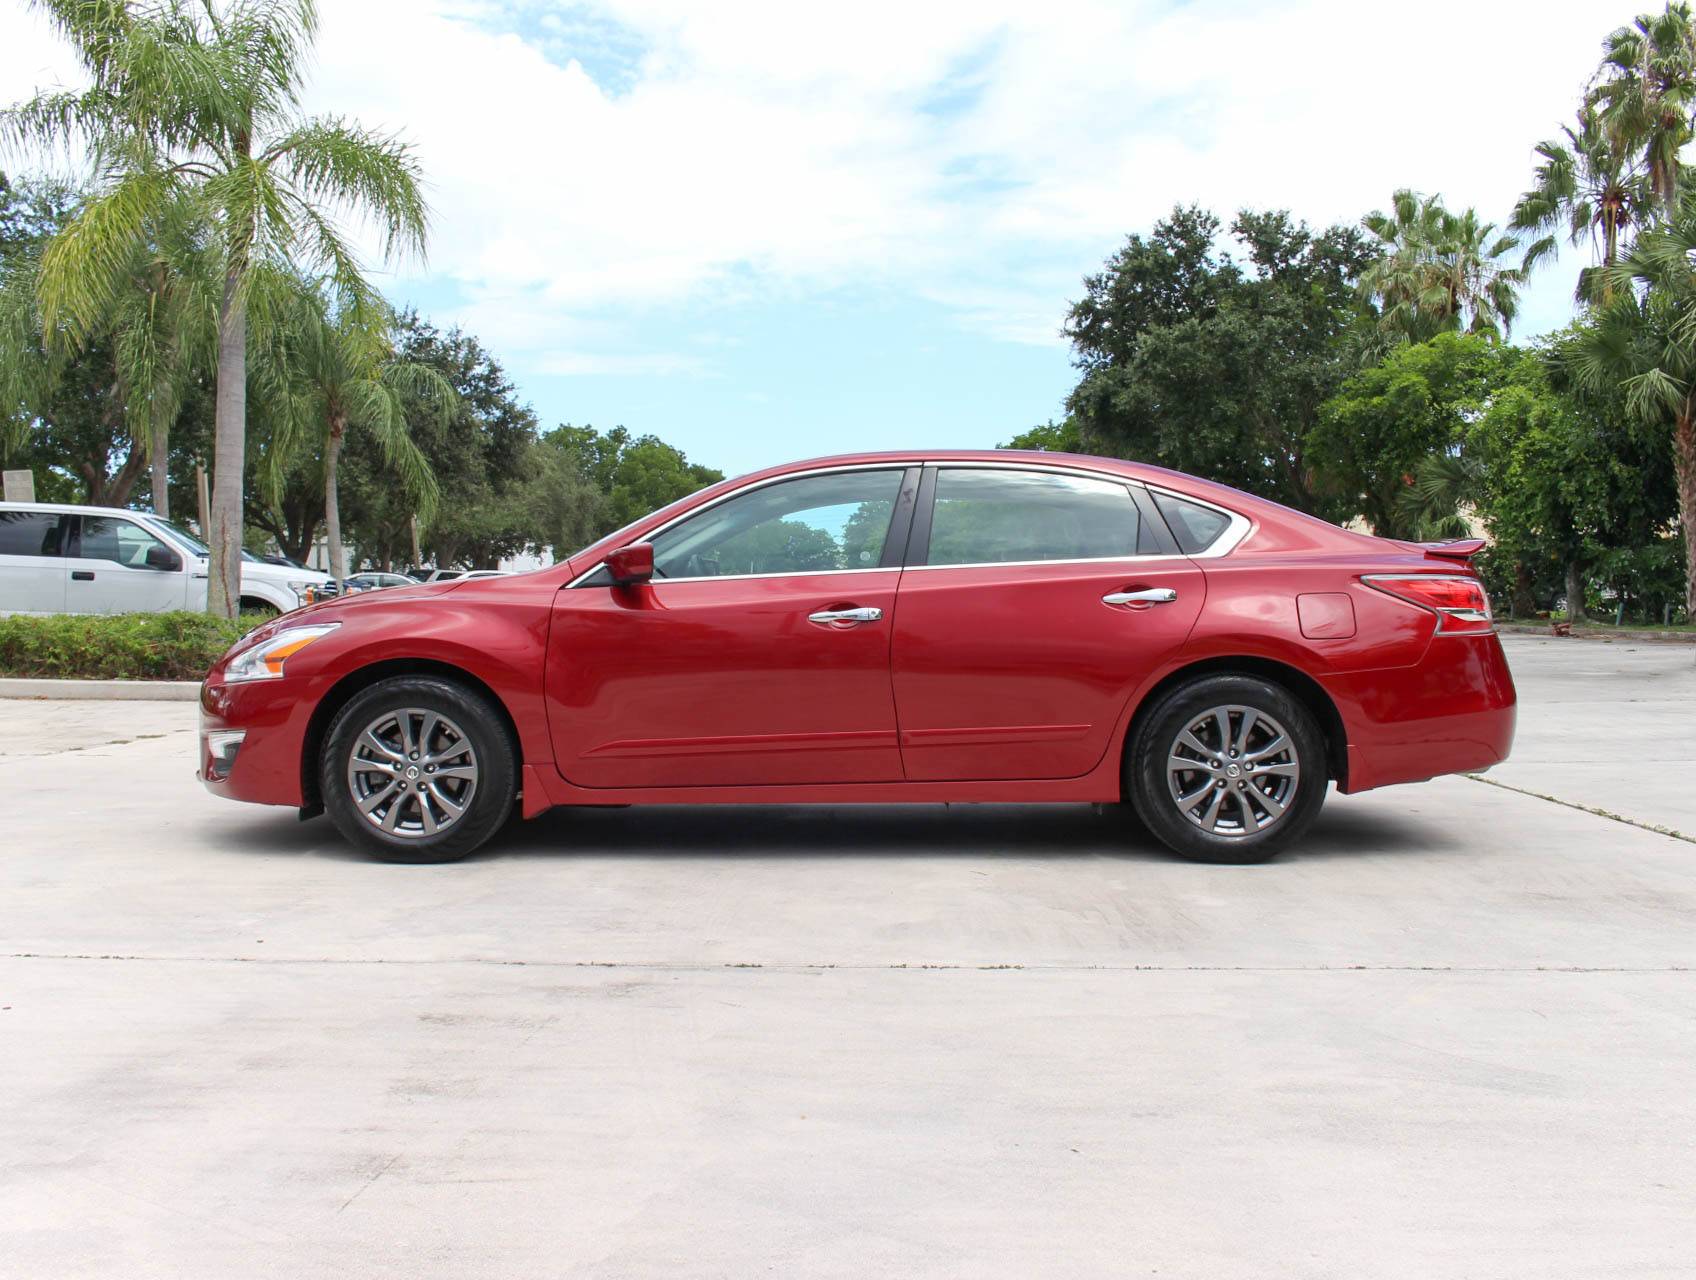 Florida Fine Cars - Used NISSAN ALTIMA 2015 MARGATE Special Edition